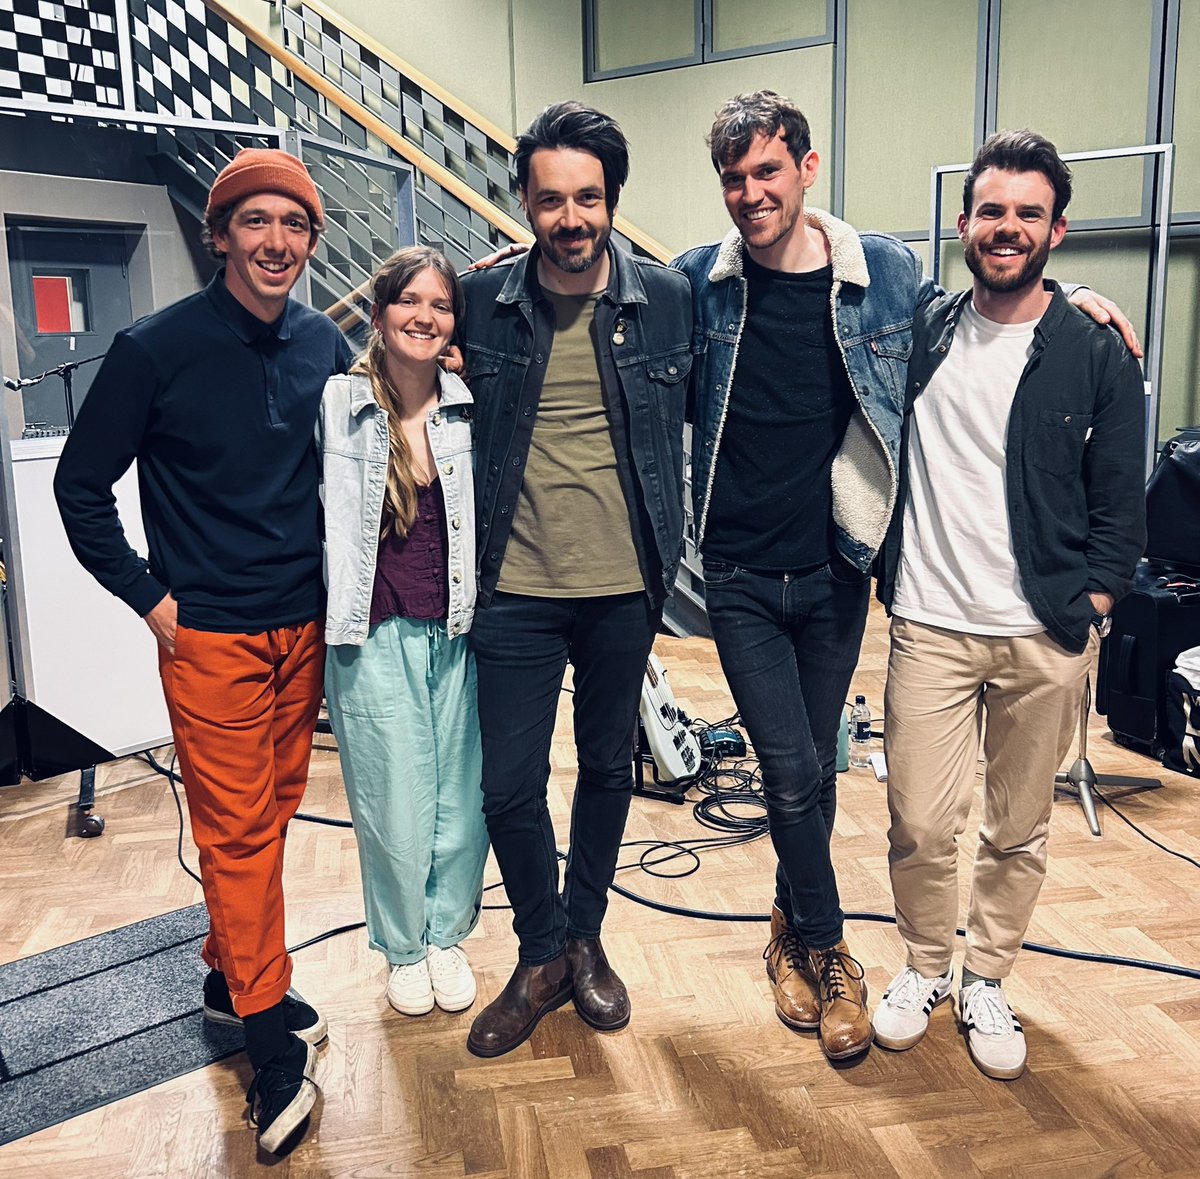 Tonight on #bbcquaysessions we have @TommyAshbyMusic and band live in session and in conversation. Plus, @RachaelDadd picks her favourite live album and loads more. It’s gonna be good! 8.05pm @BBCRadioScot and @BBCSounds